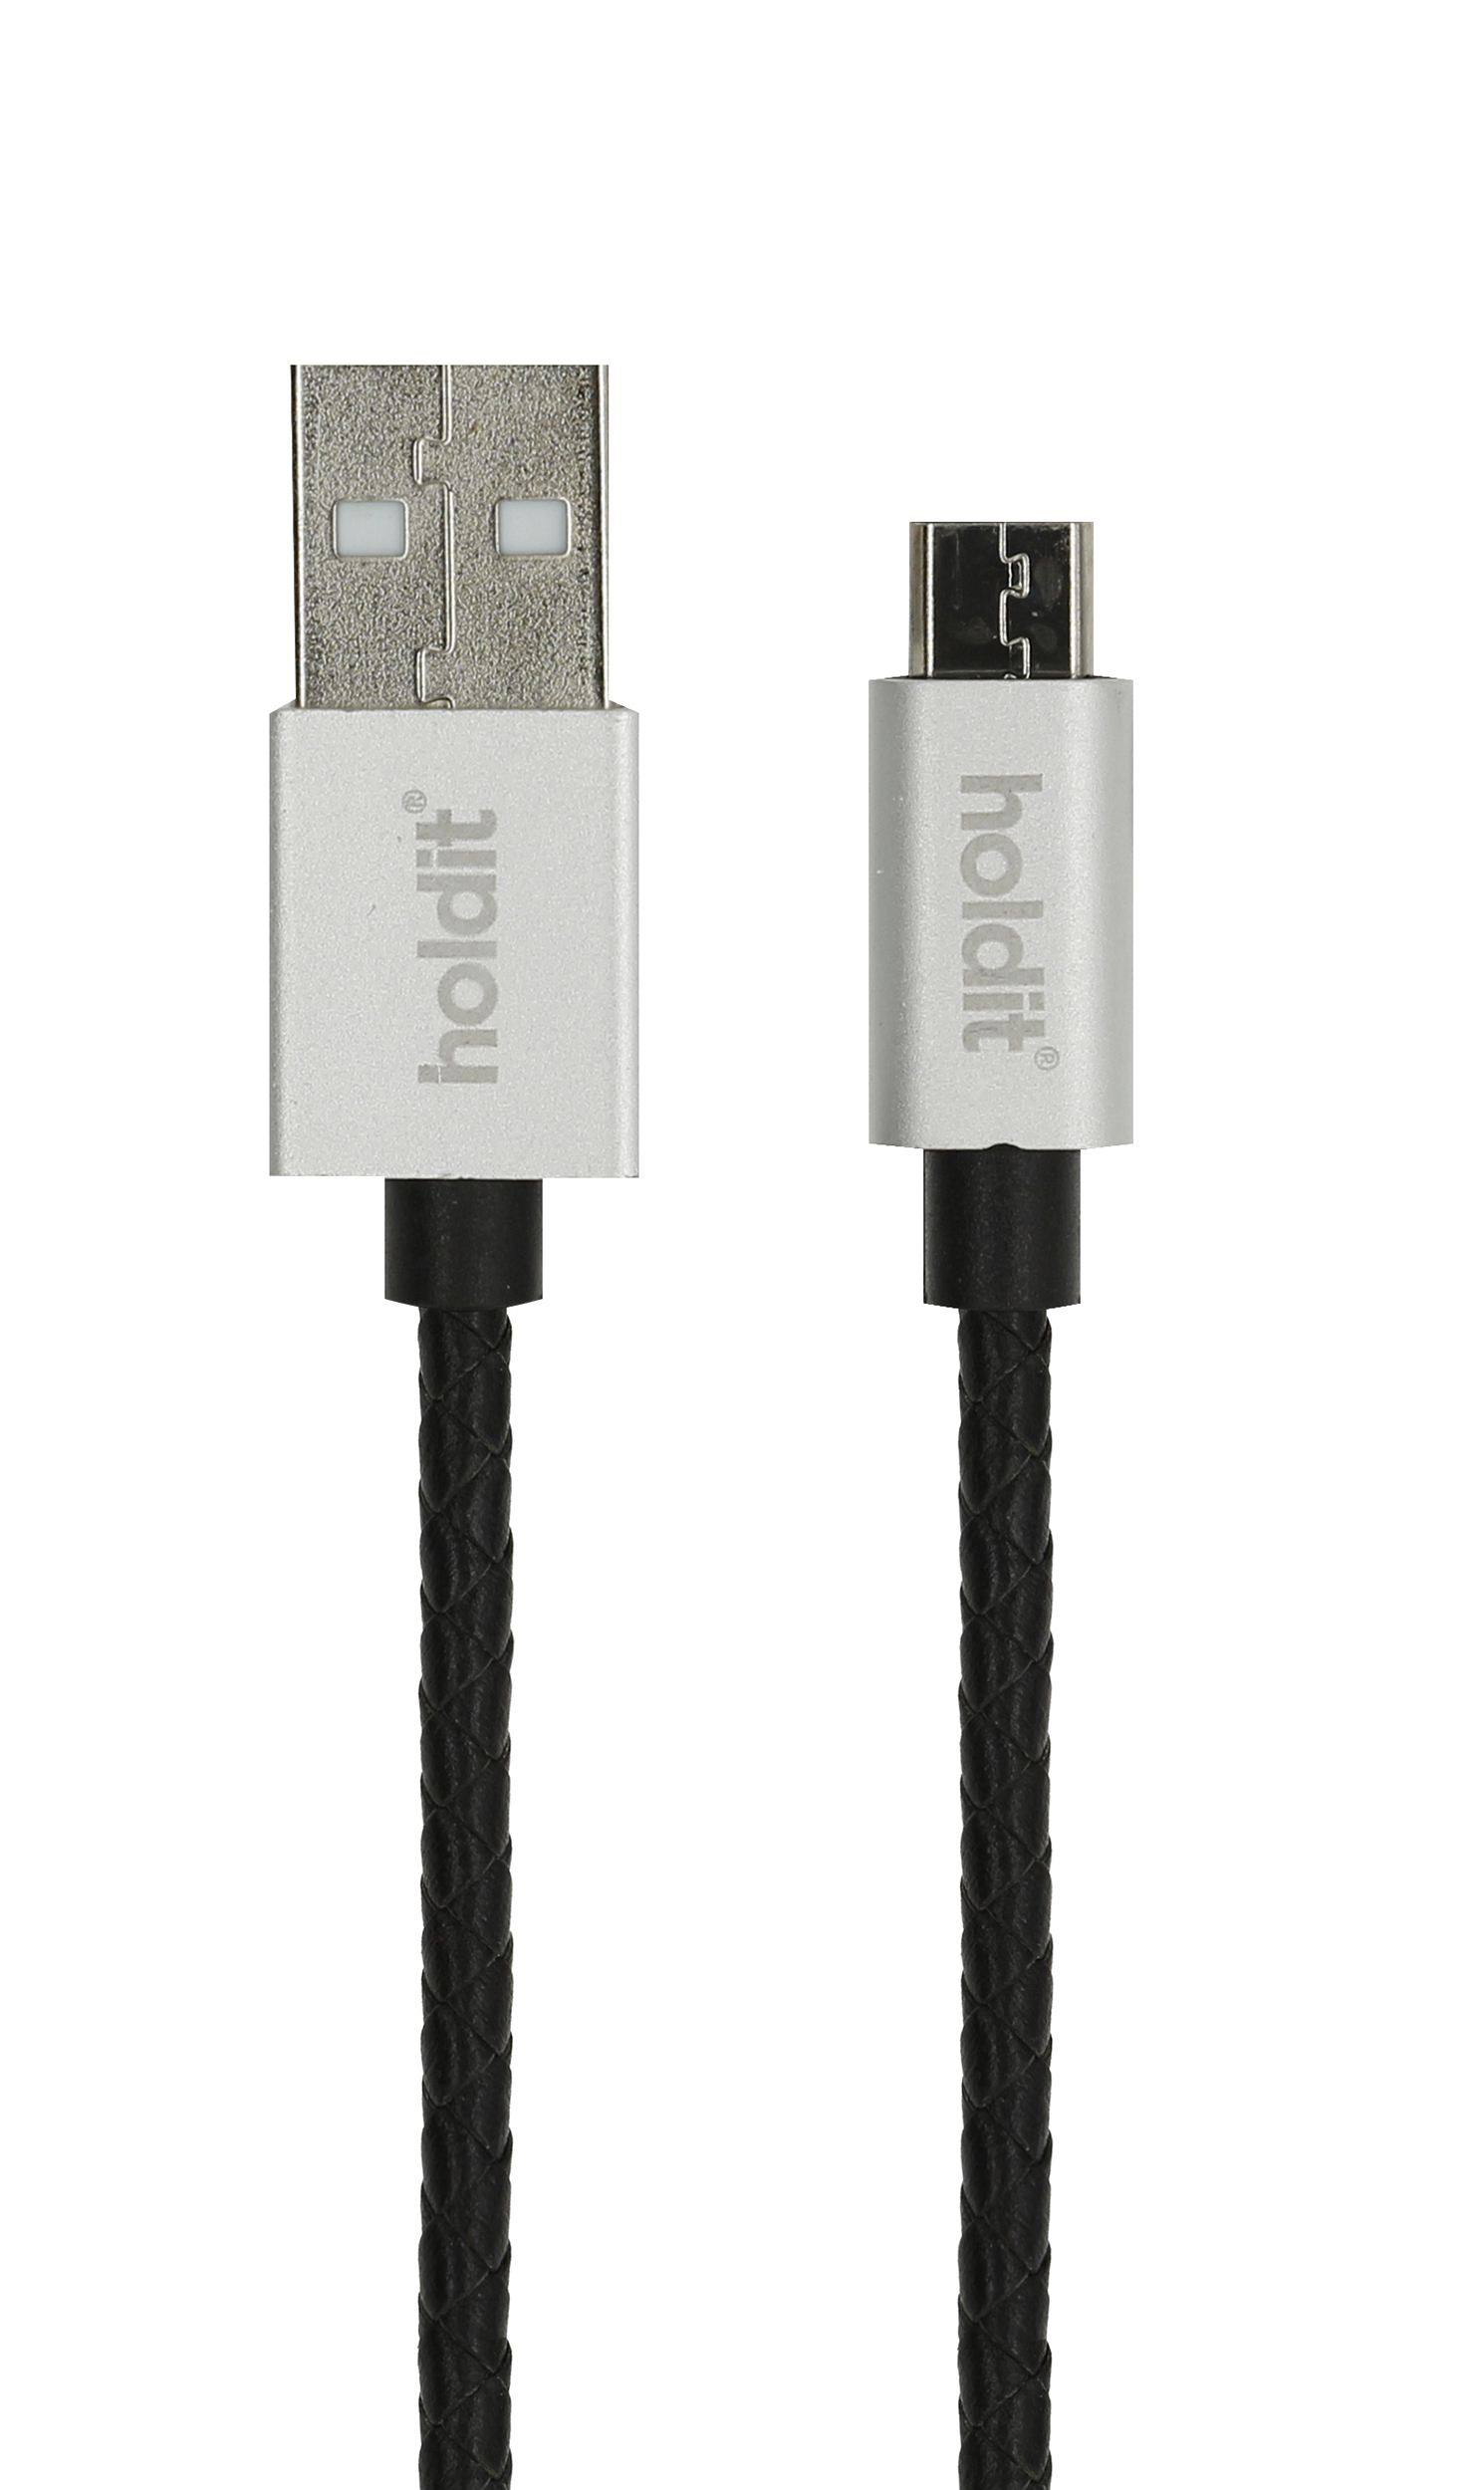 Usb cable, selected micro-usb, 1m, braided, black/silver